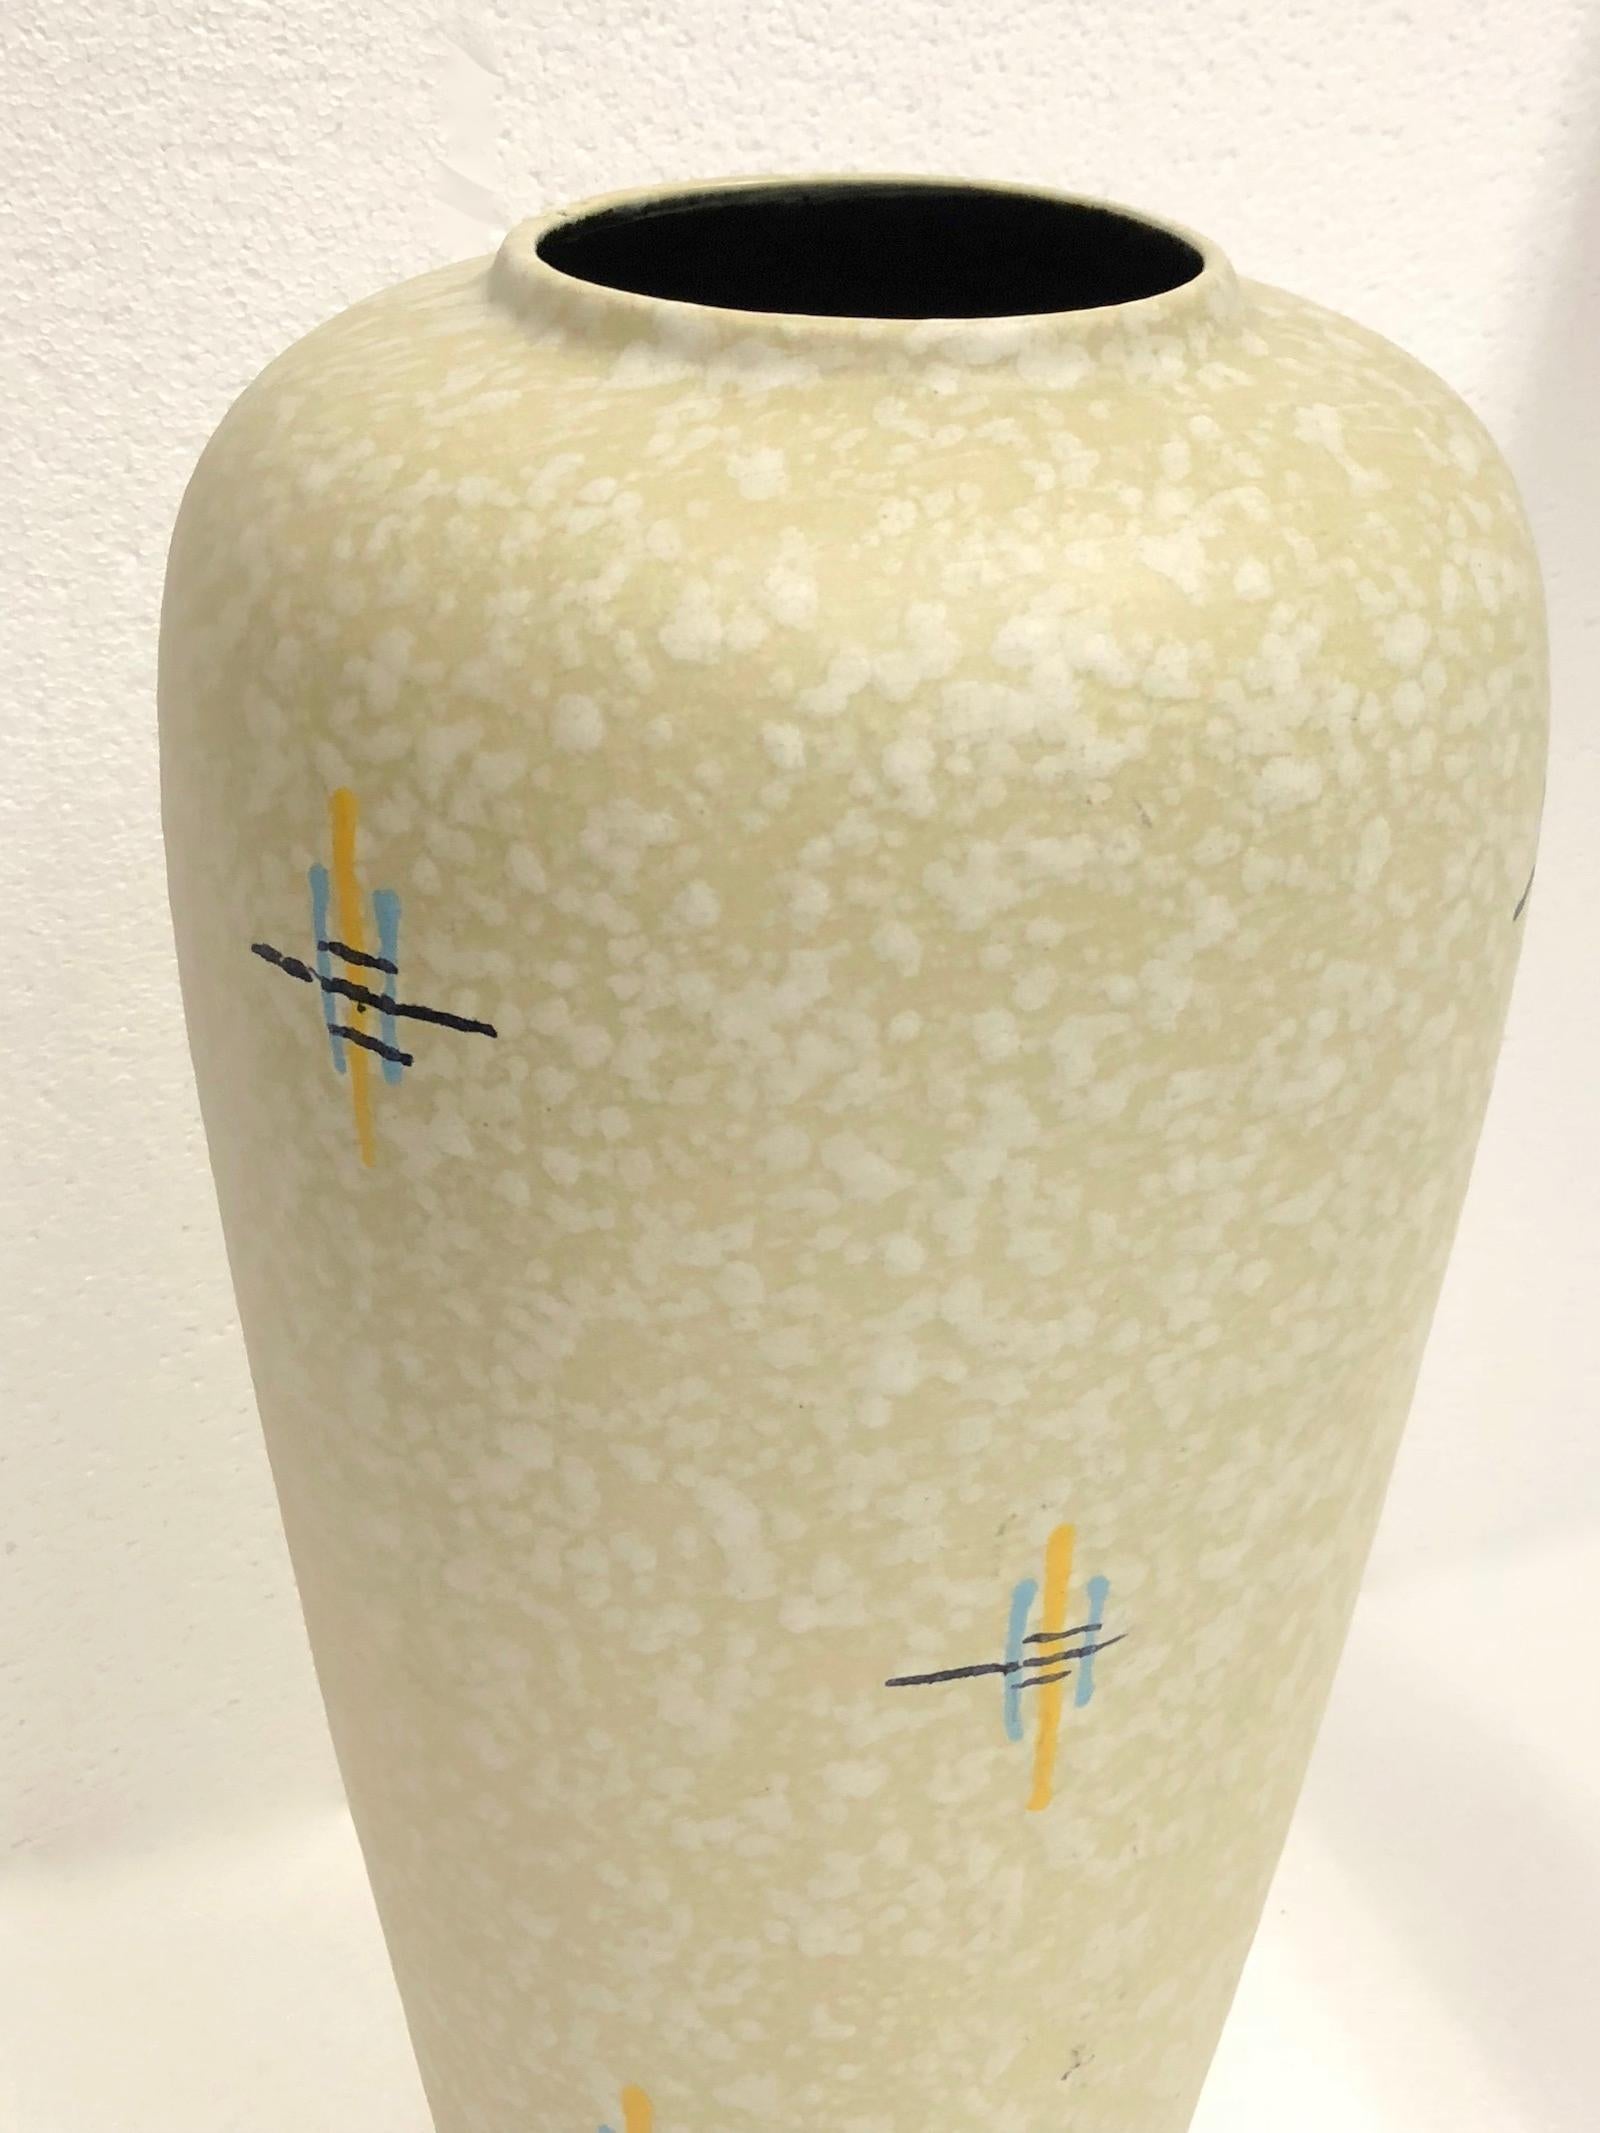 Mid-20th Century Tall Midcentury German Pottery Floor Vase Umbrella Stand by Scheurich For Sale